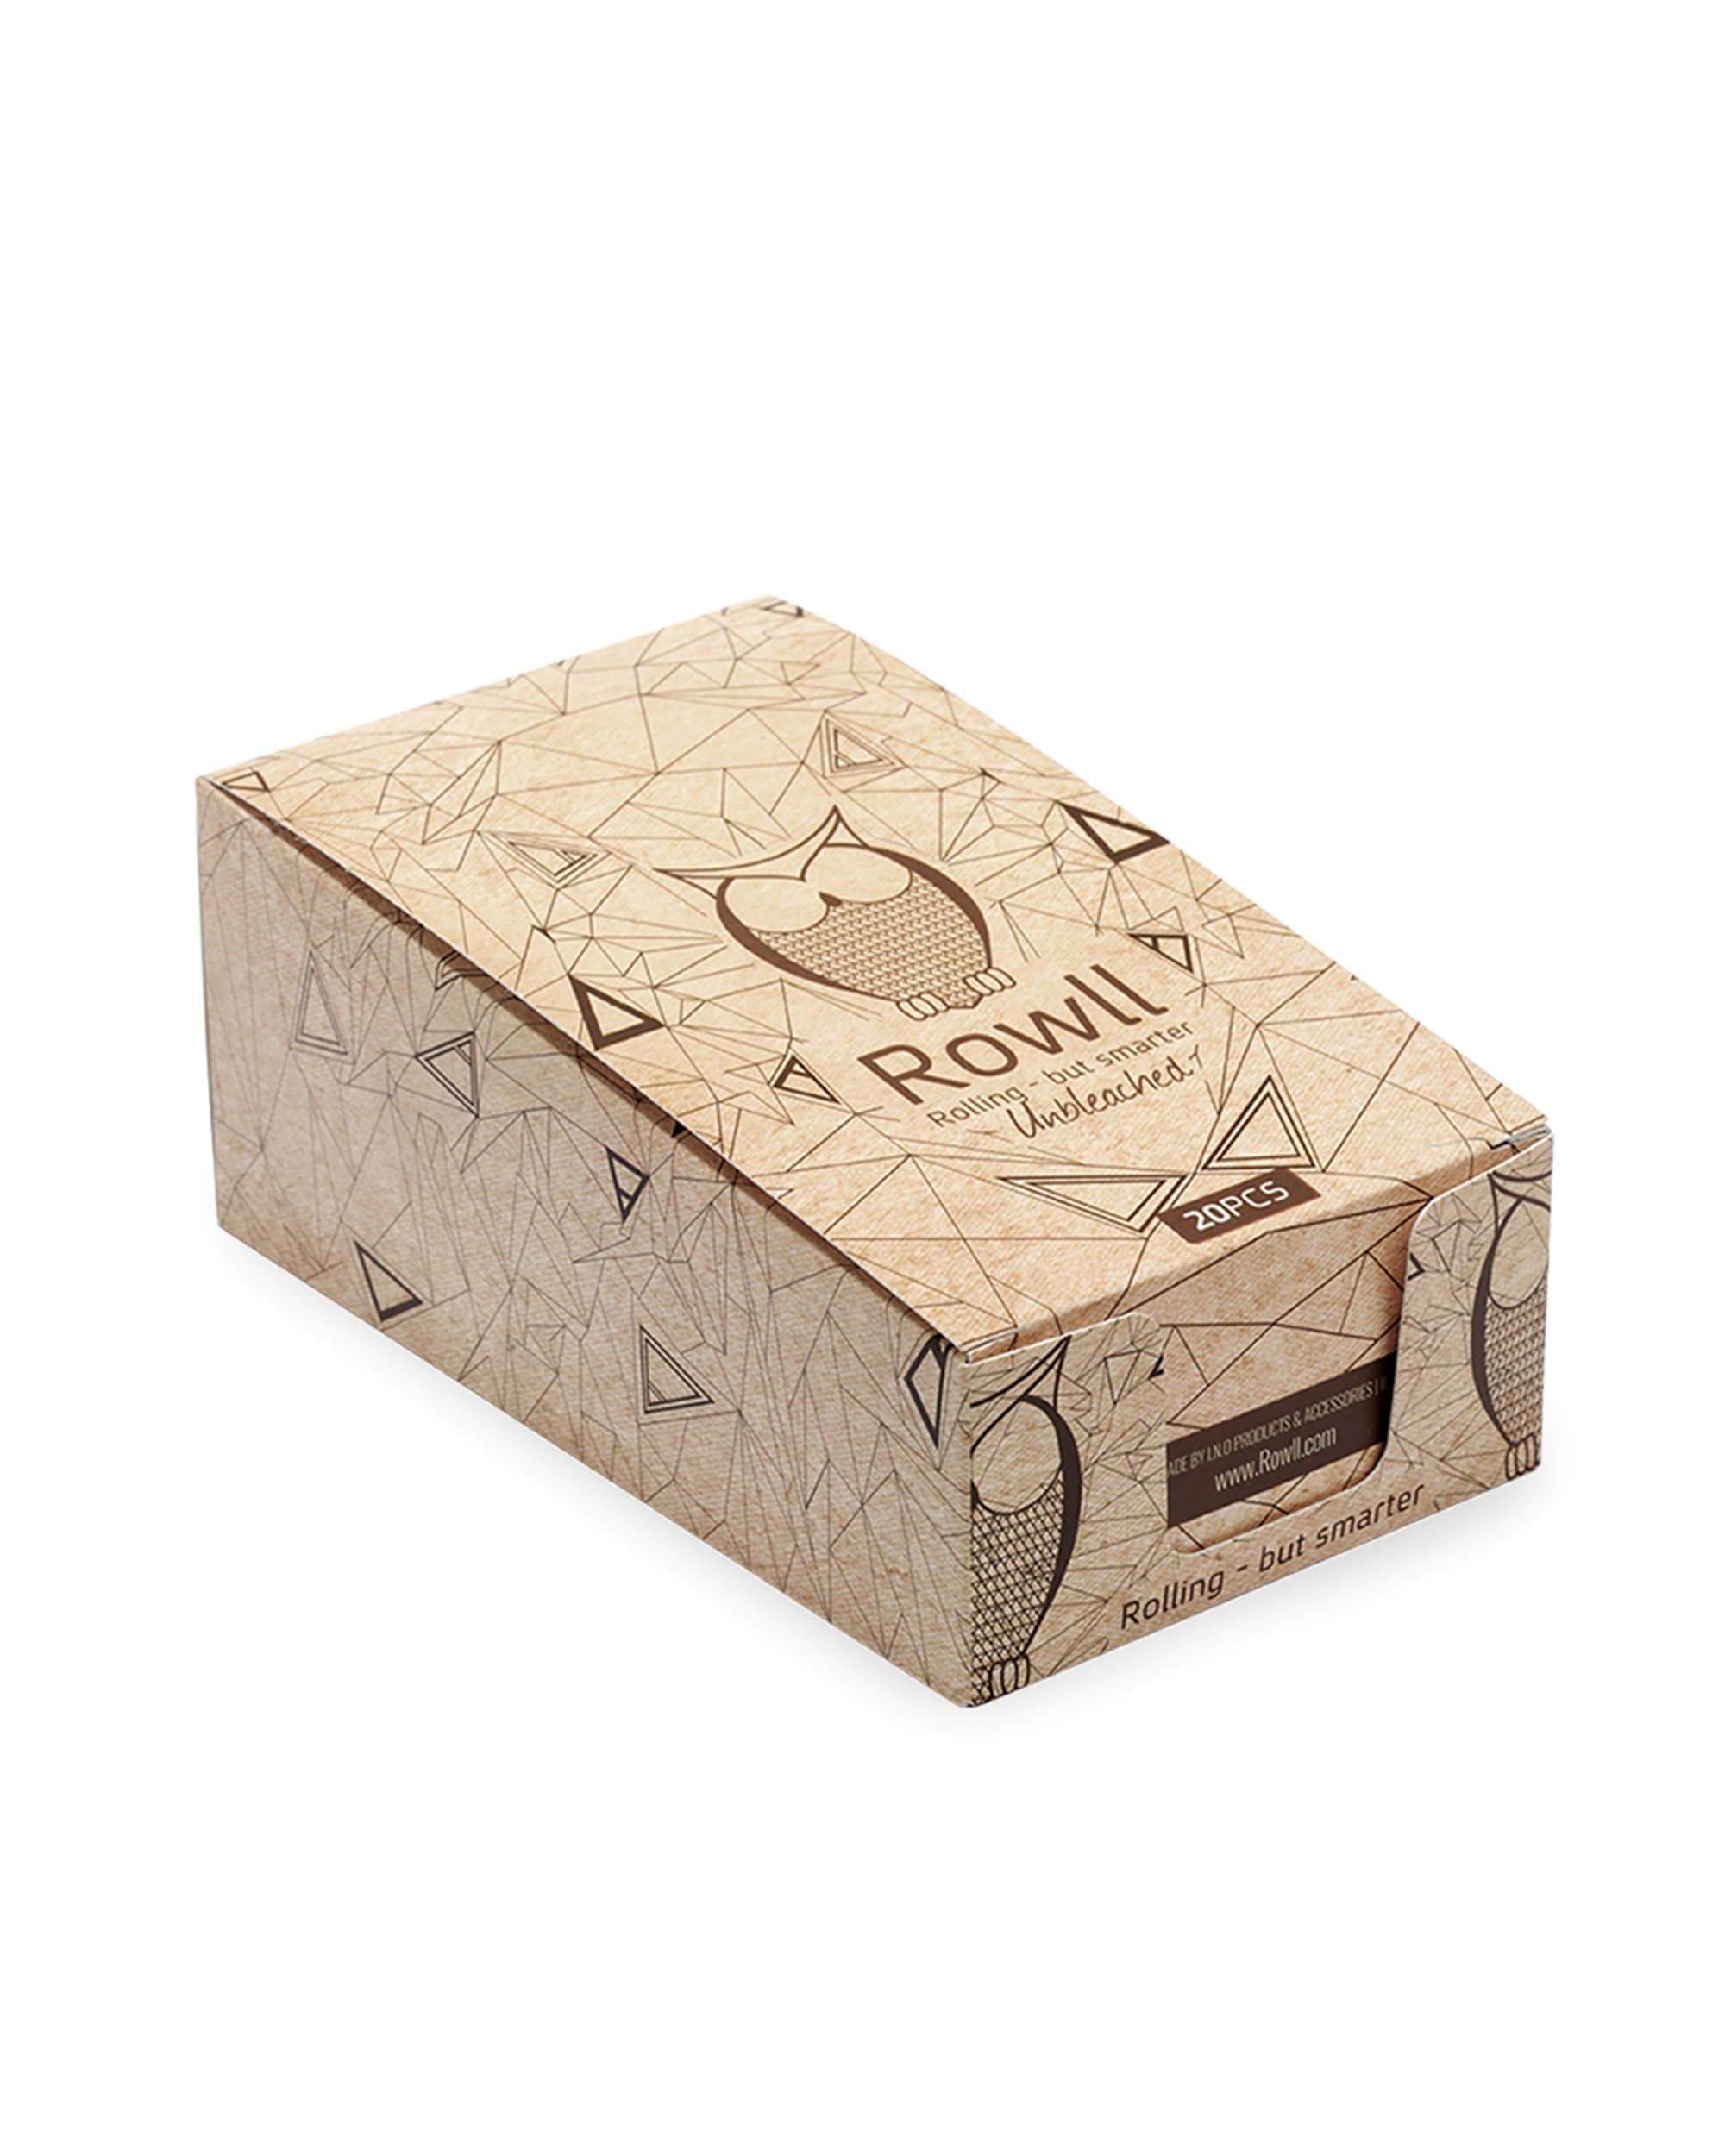 https://www.moderndayhippiebrand.com/cdn/shop/products/rowll-all-in-one-rolling-paper-kit-w-grinder-unbleached-box-of-20-rolling-papers-rowll-og-ub-b20-14198188277834_2000x.jpg?v=1642981848